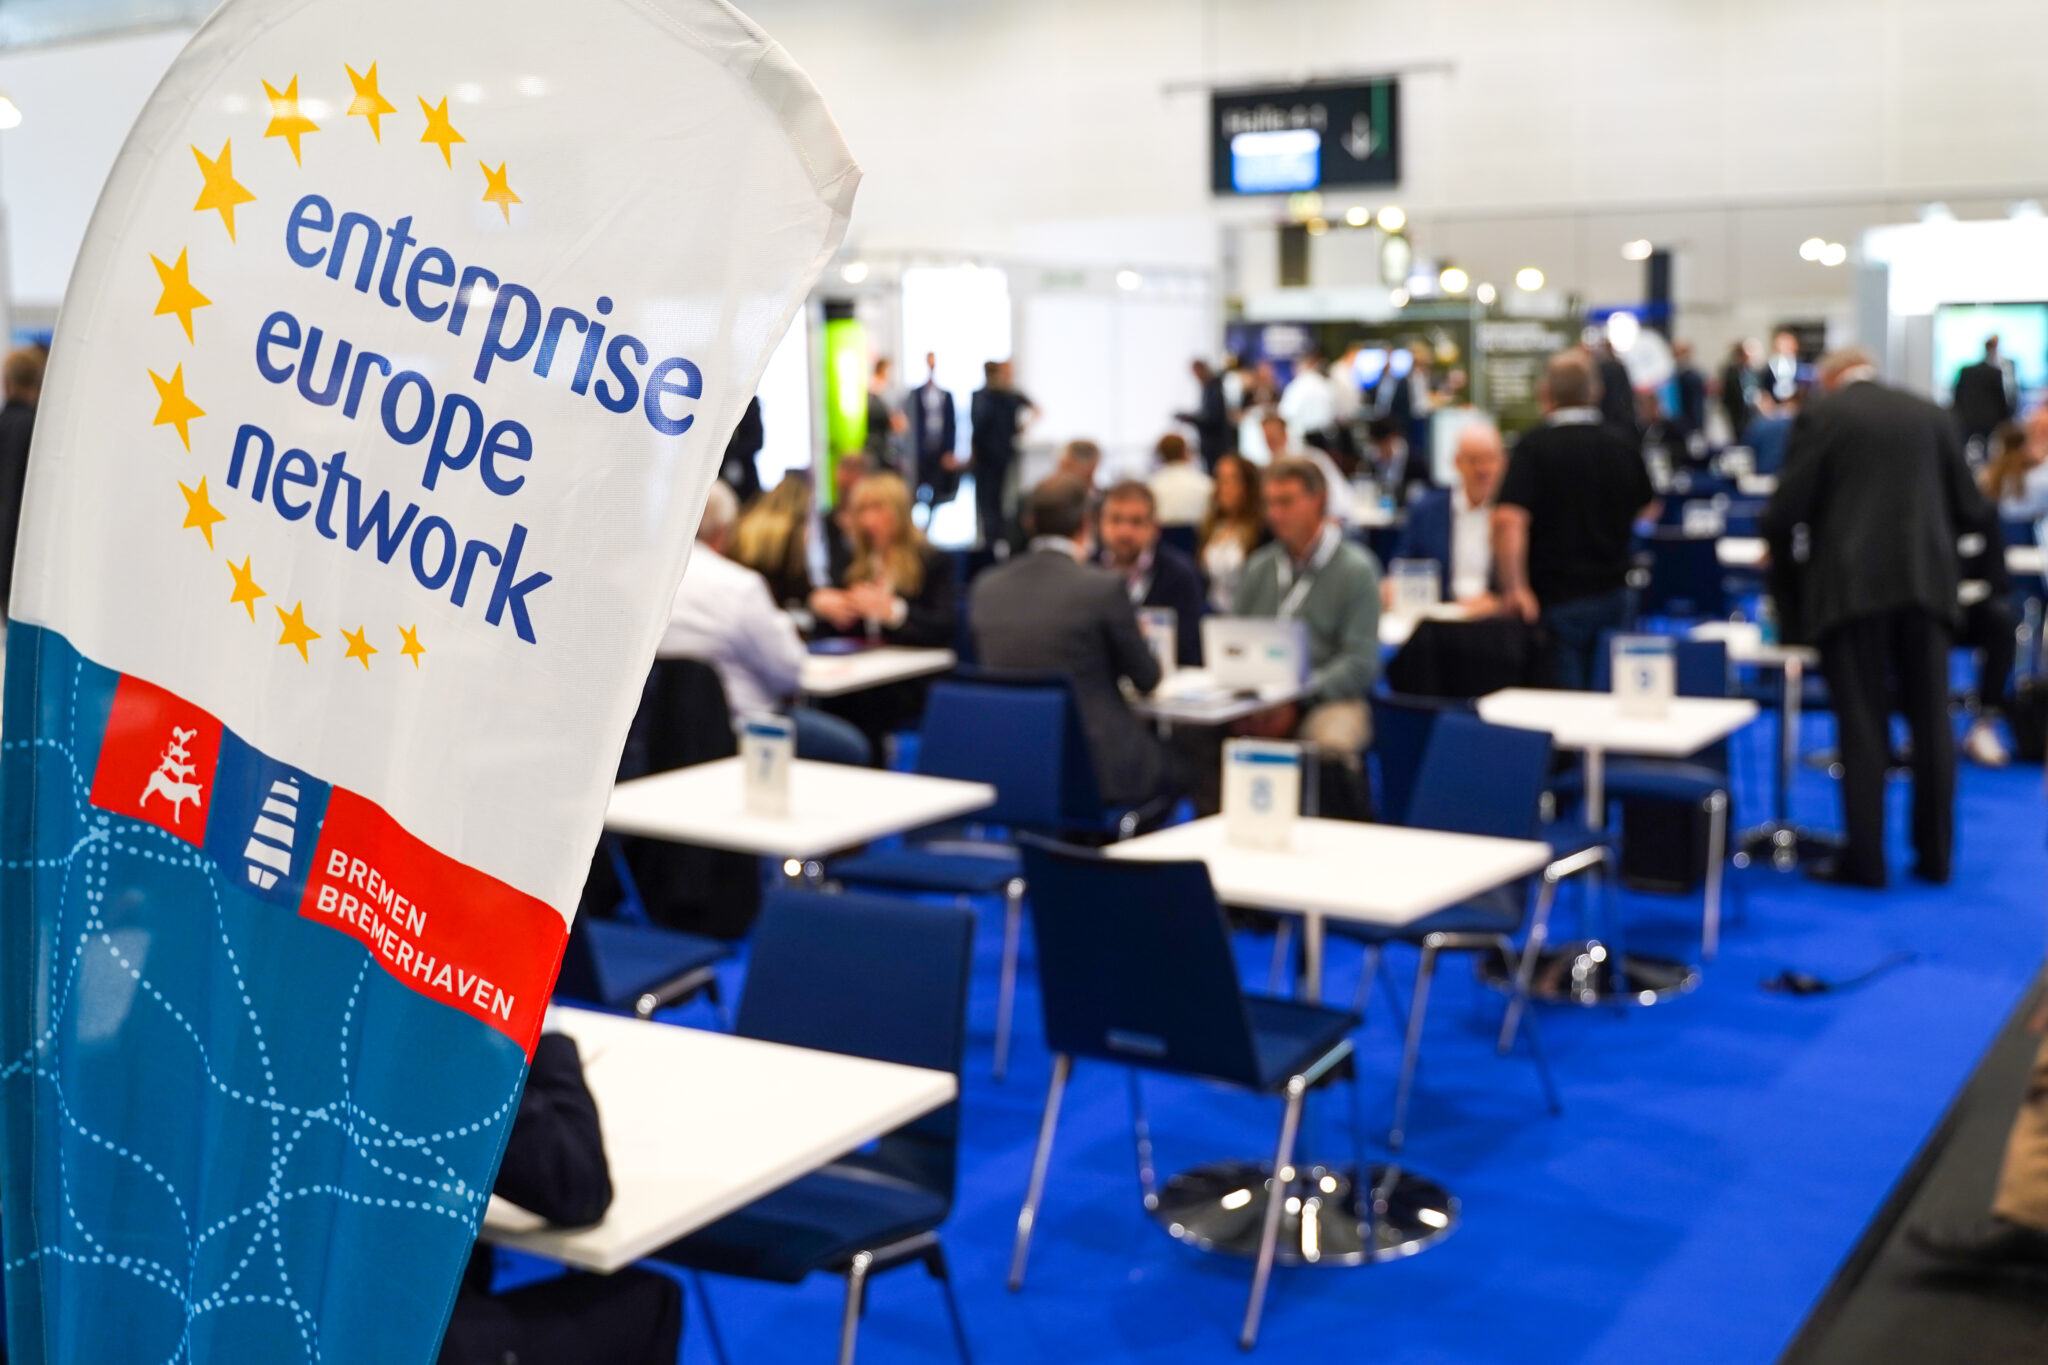 The Enterprise Europe Network (EEN) connects trade fair participants from all over the world with its matchmaking events, Image: SWAE/Raveling